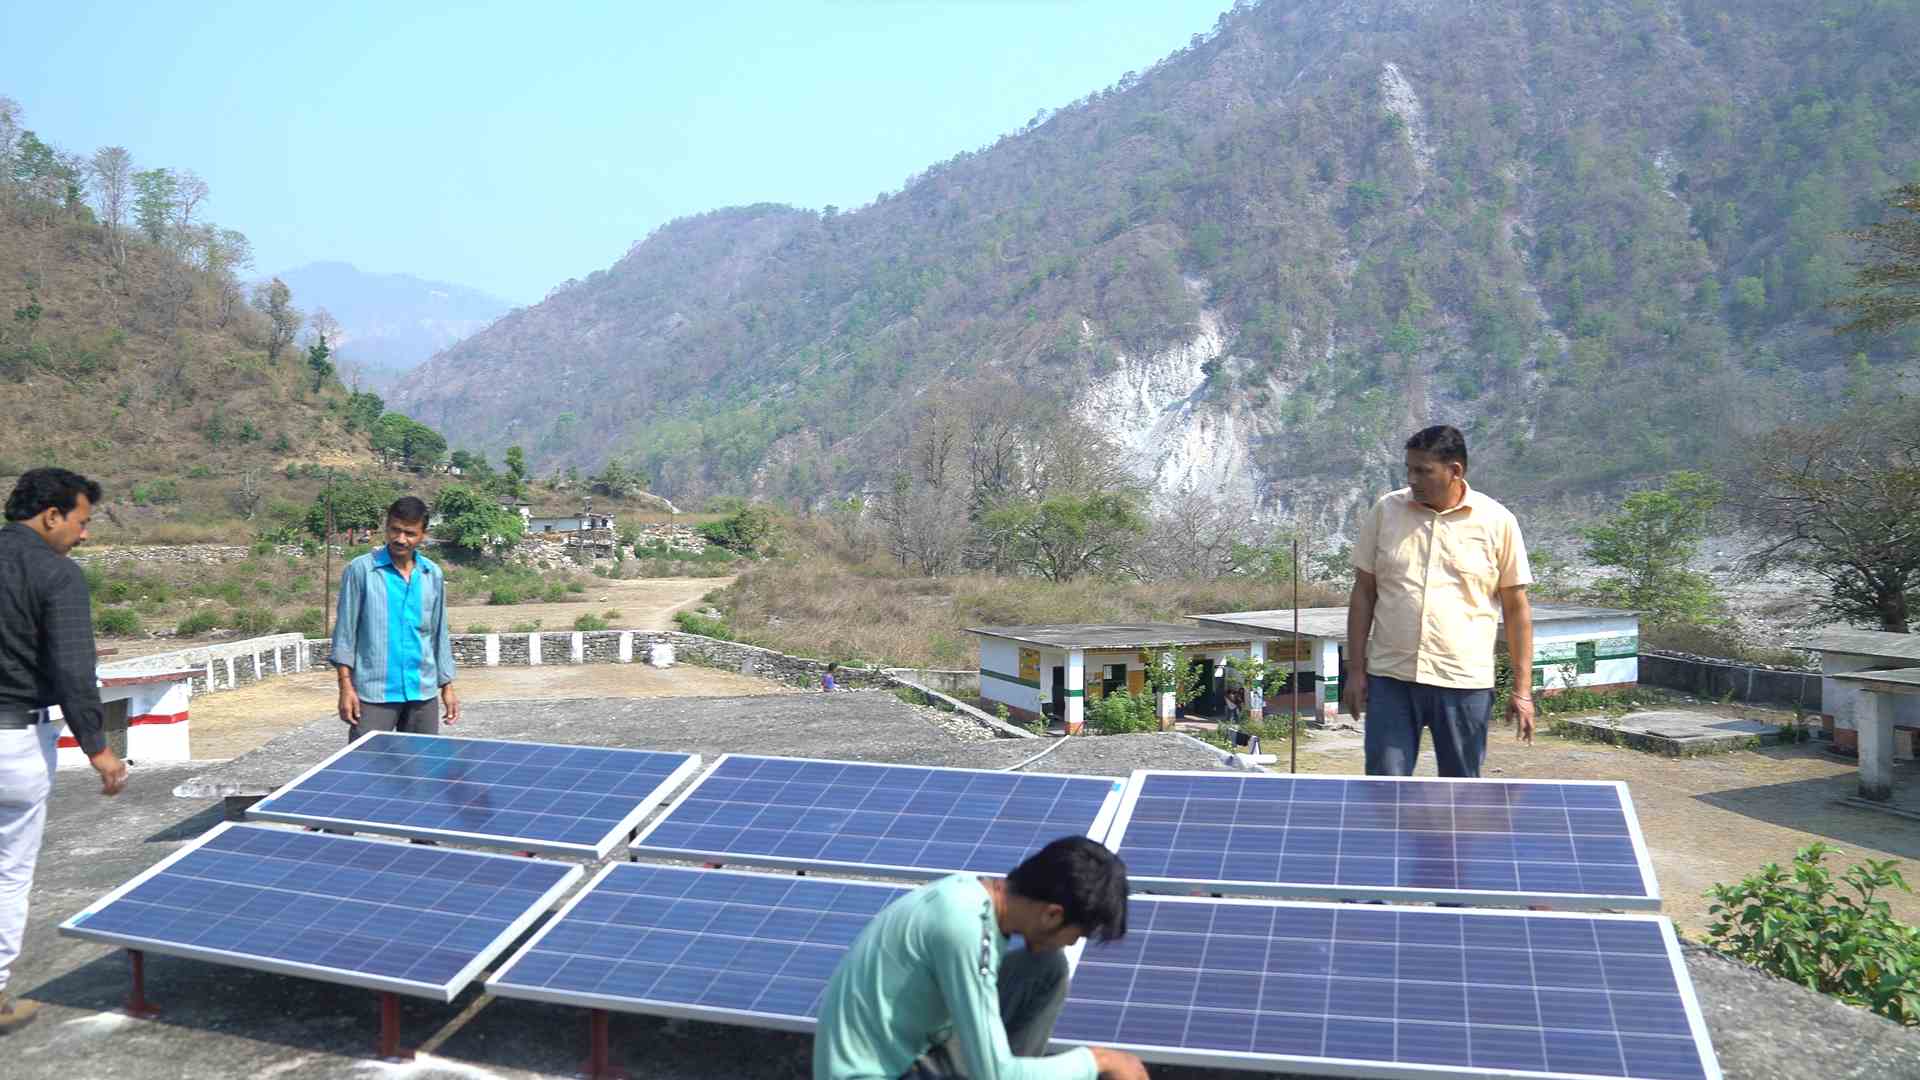 The solar panels installed in the school are now used to power the computers that lay dysfunctional for years